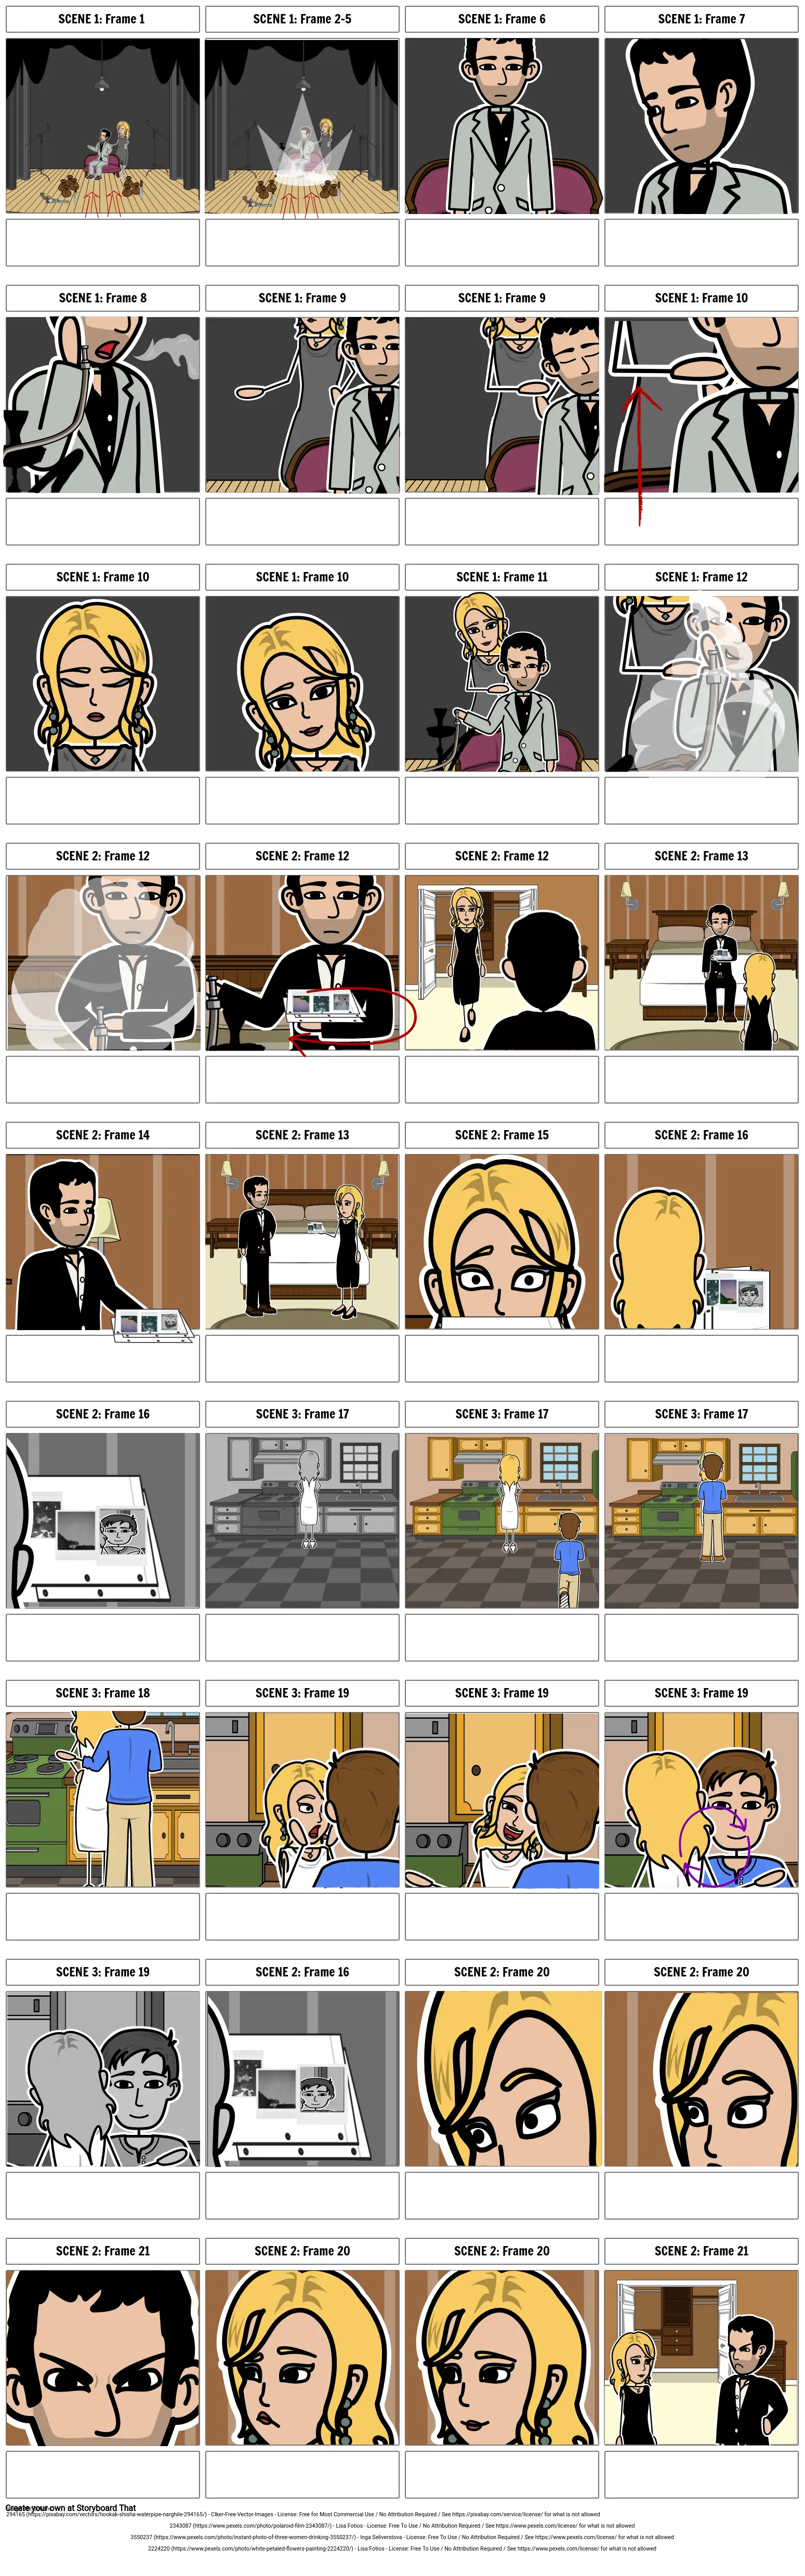 On A Trip Music Video Storyboard